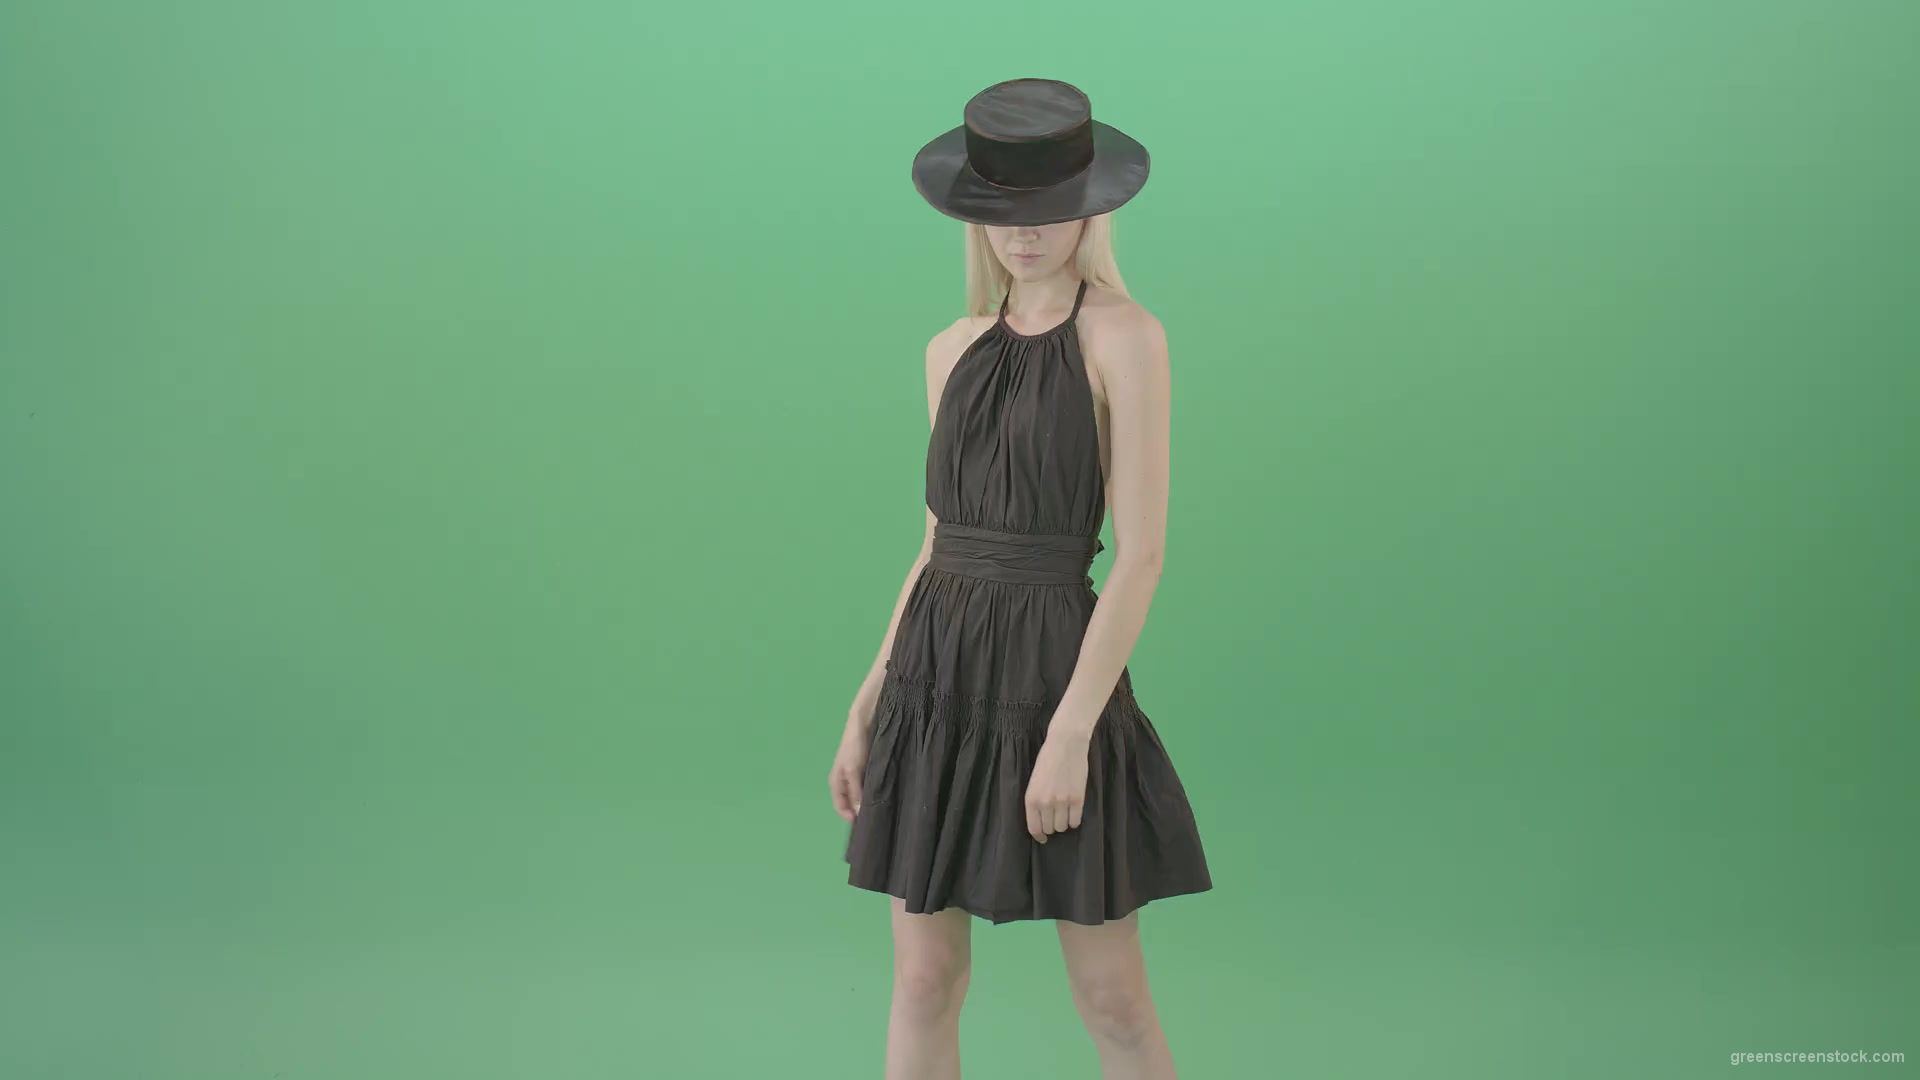 Fashion-model-in-black-dress-posing-dance-isolated-on-green-background-4K-Video-Footage-1920_001 Green Screen Stock